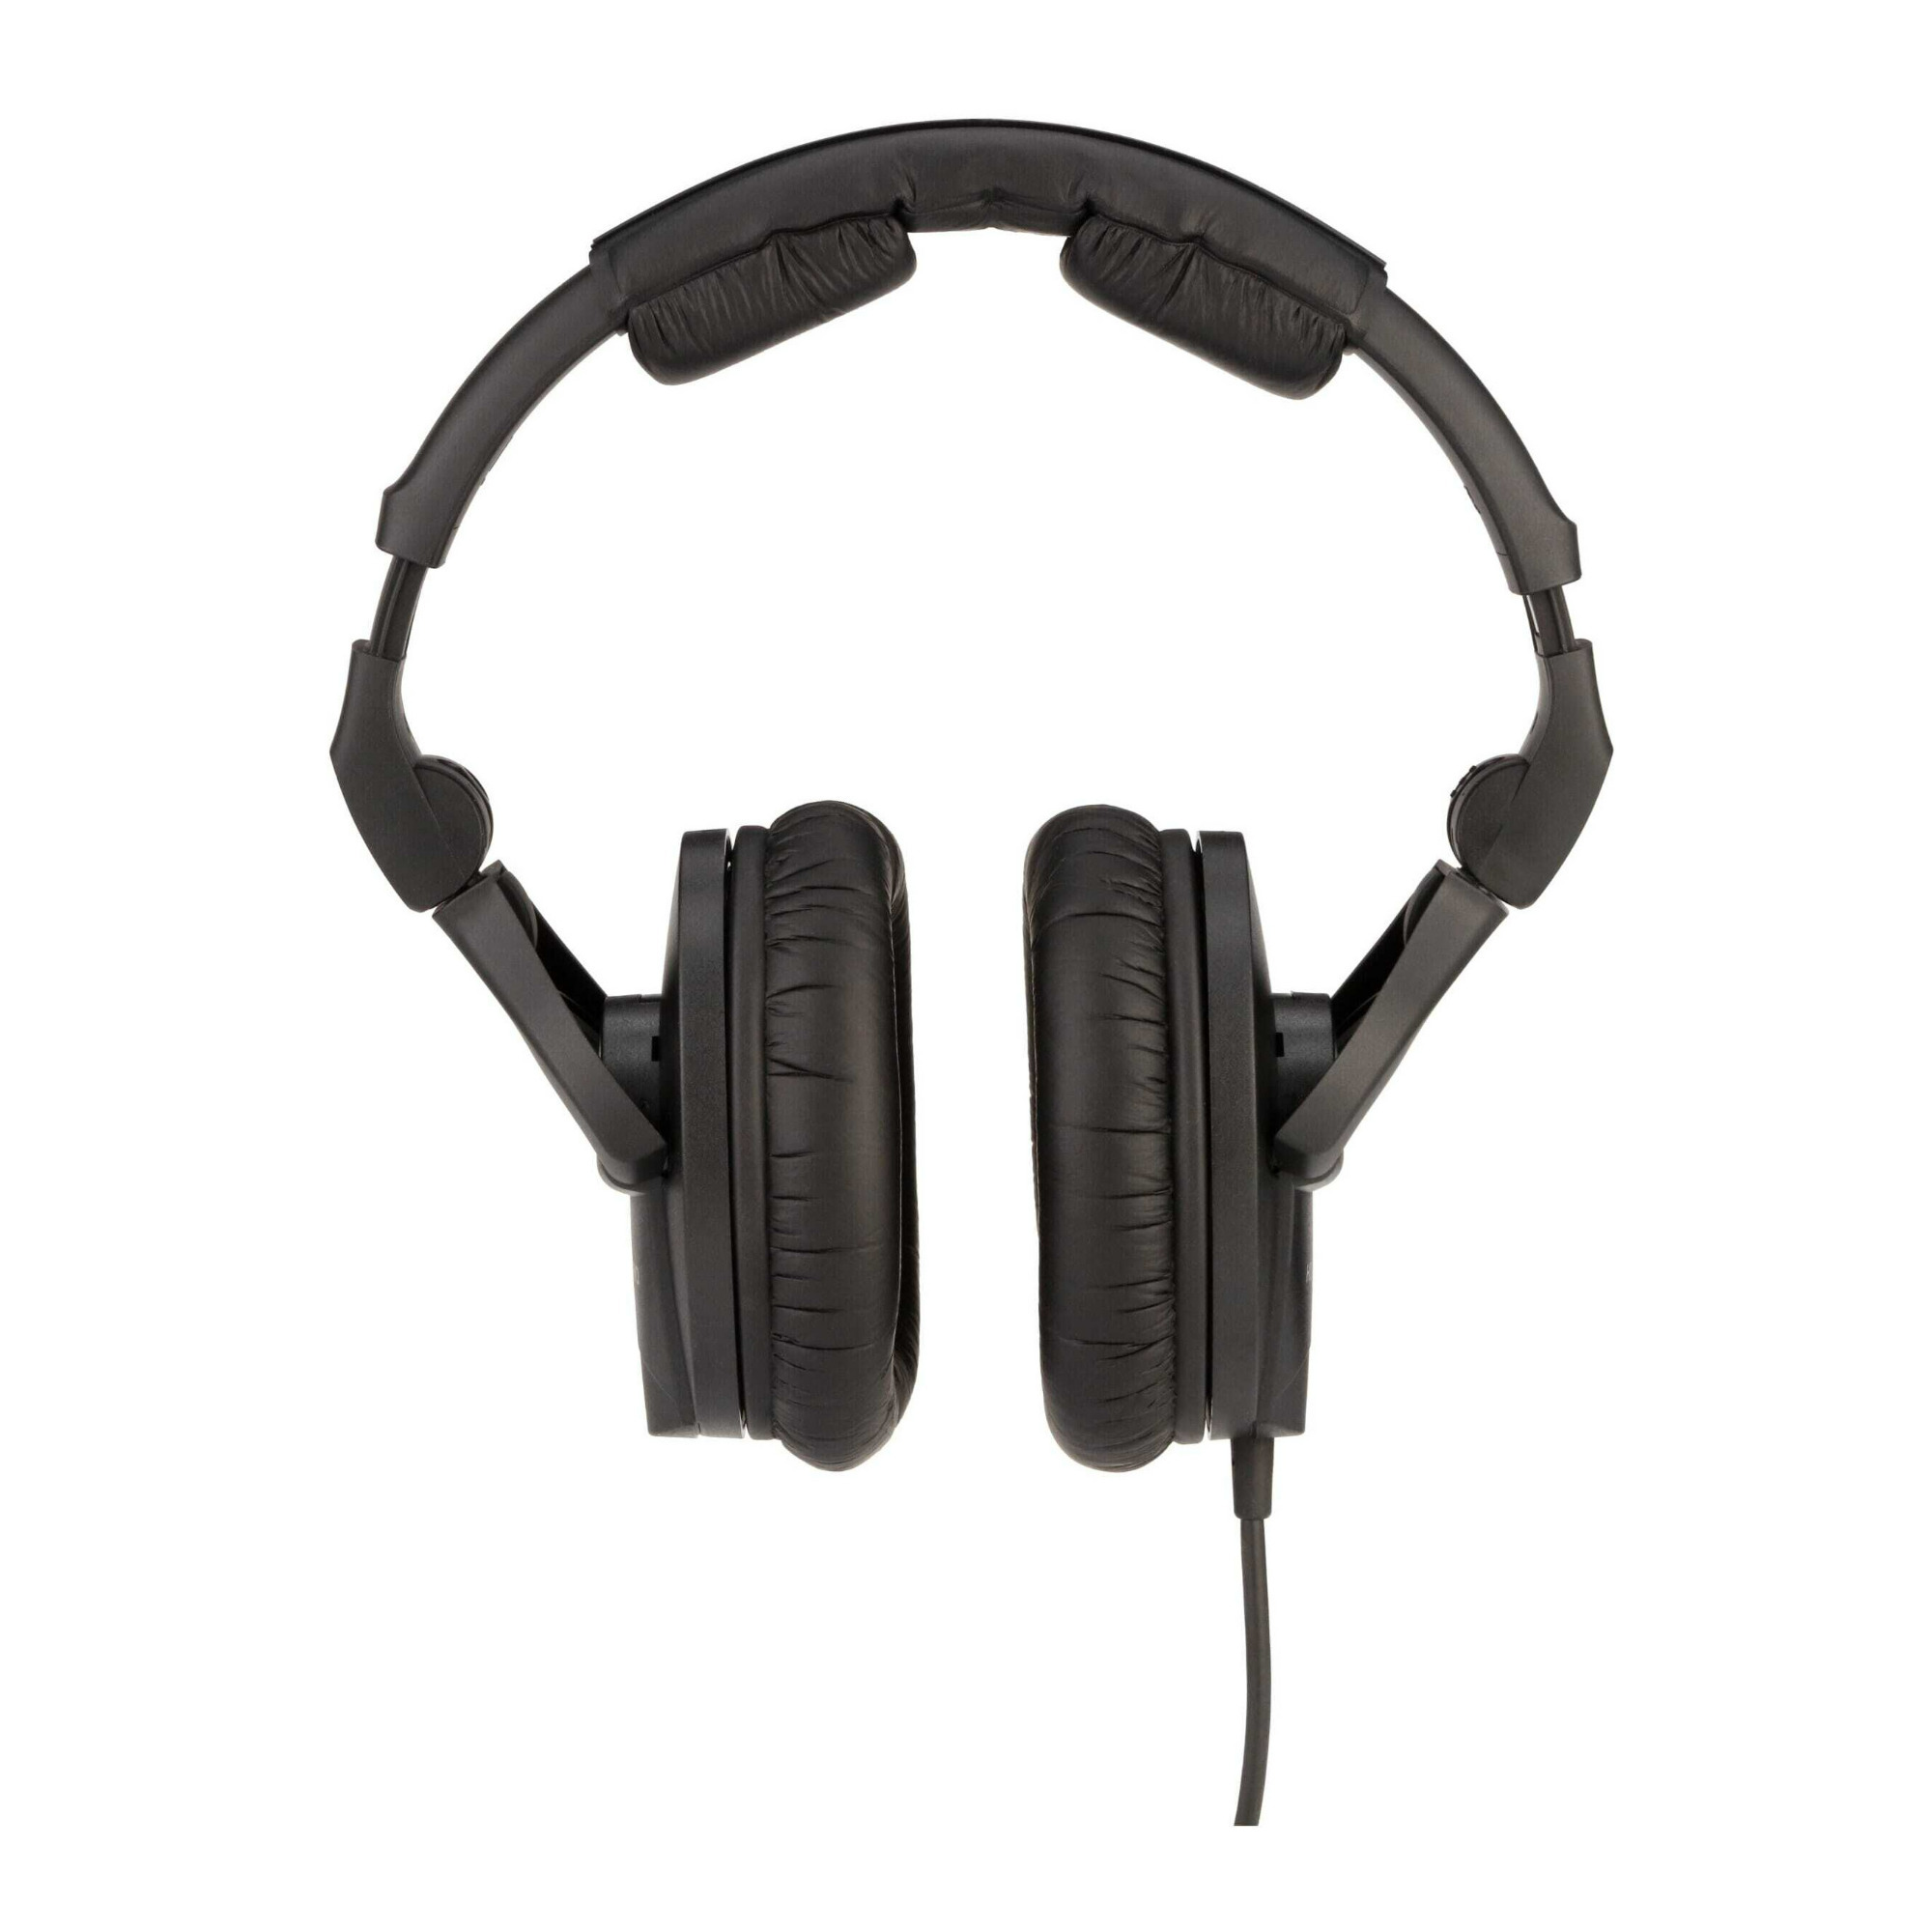 Sennheiser Professional HD 280 PRO 113 dB Over-Ear Monitoring Headphones with Adapter in Black -  506845